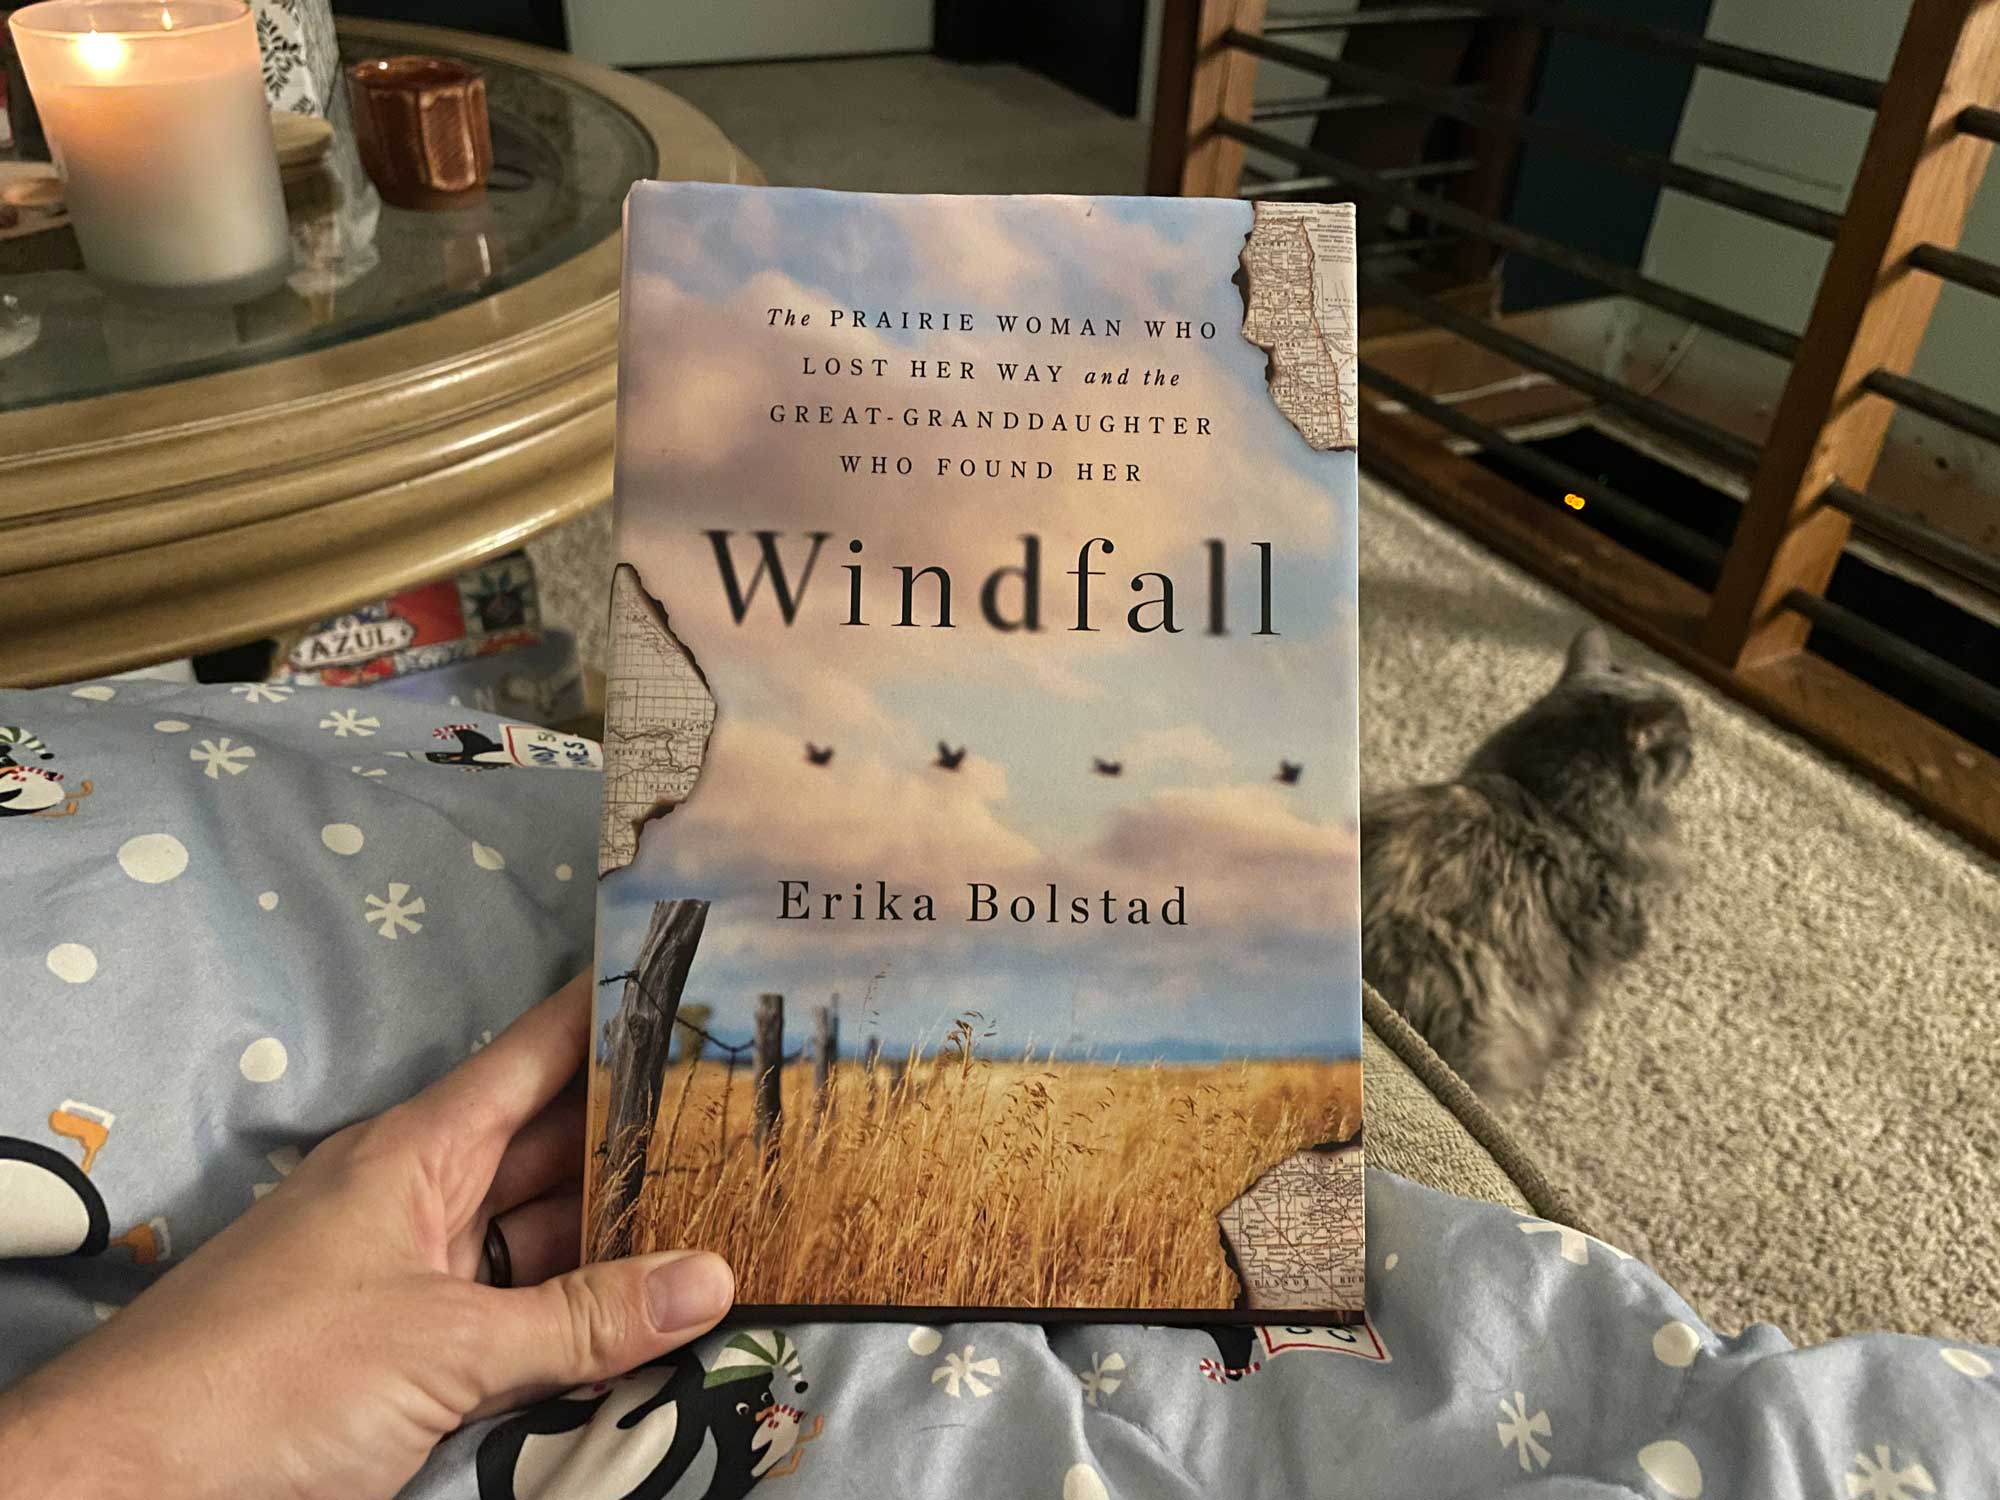 The cover of a book titled Windfall being held on a blanket, with a cat and a candle in the background.